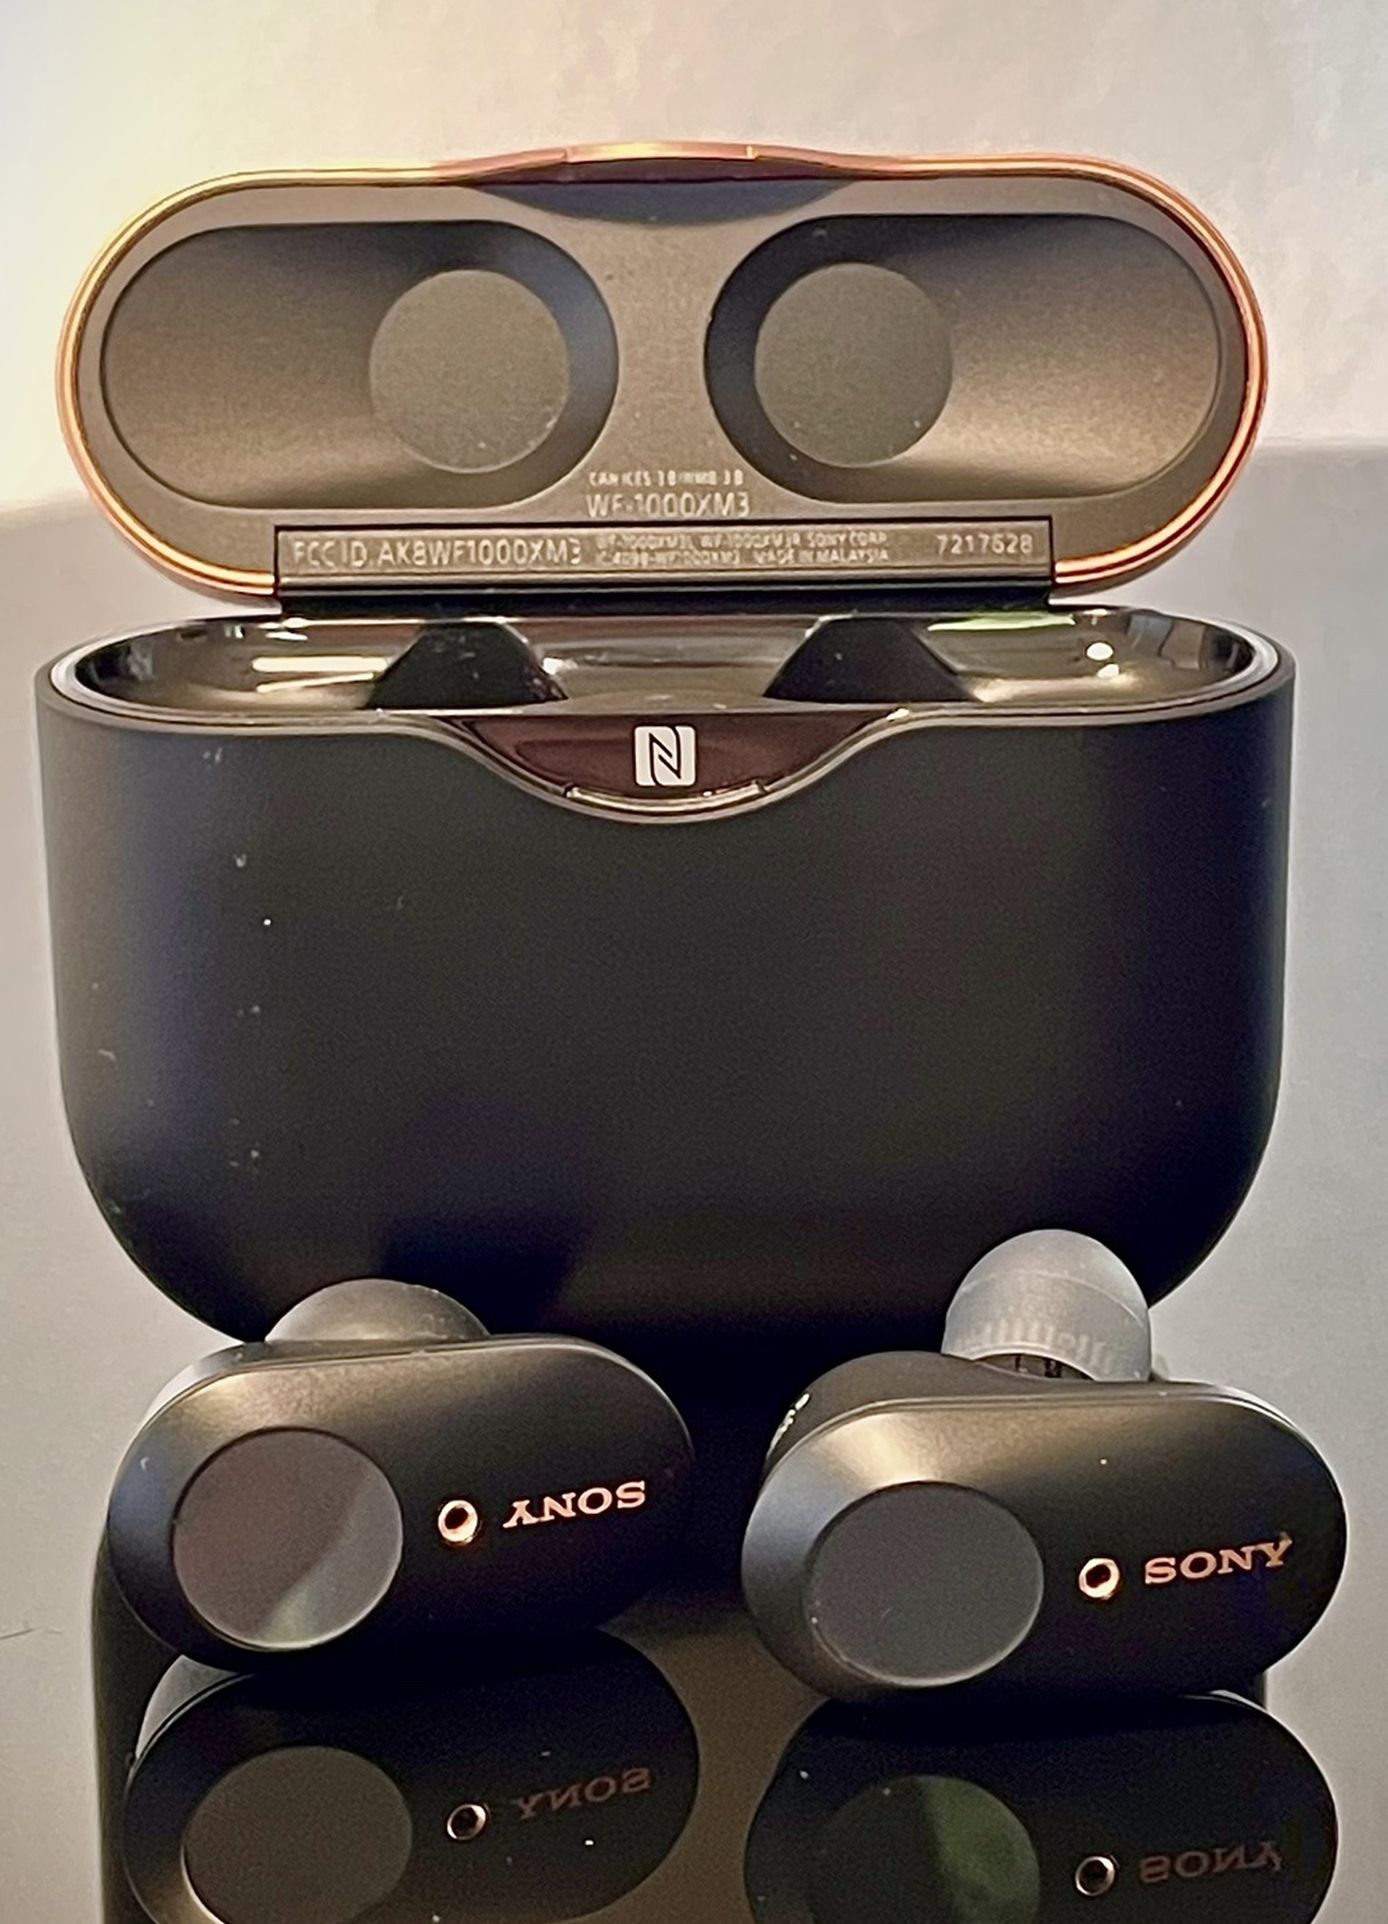 Sony WF-1000XM3 Industry Leading Noise Canceling Truly Wireless Earbuds Headset.